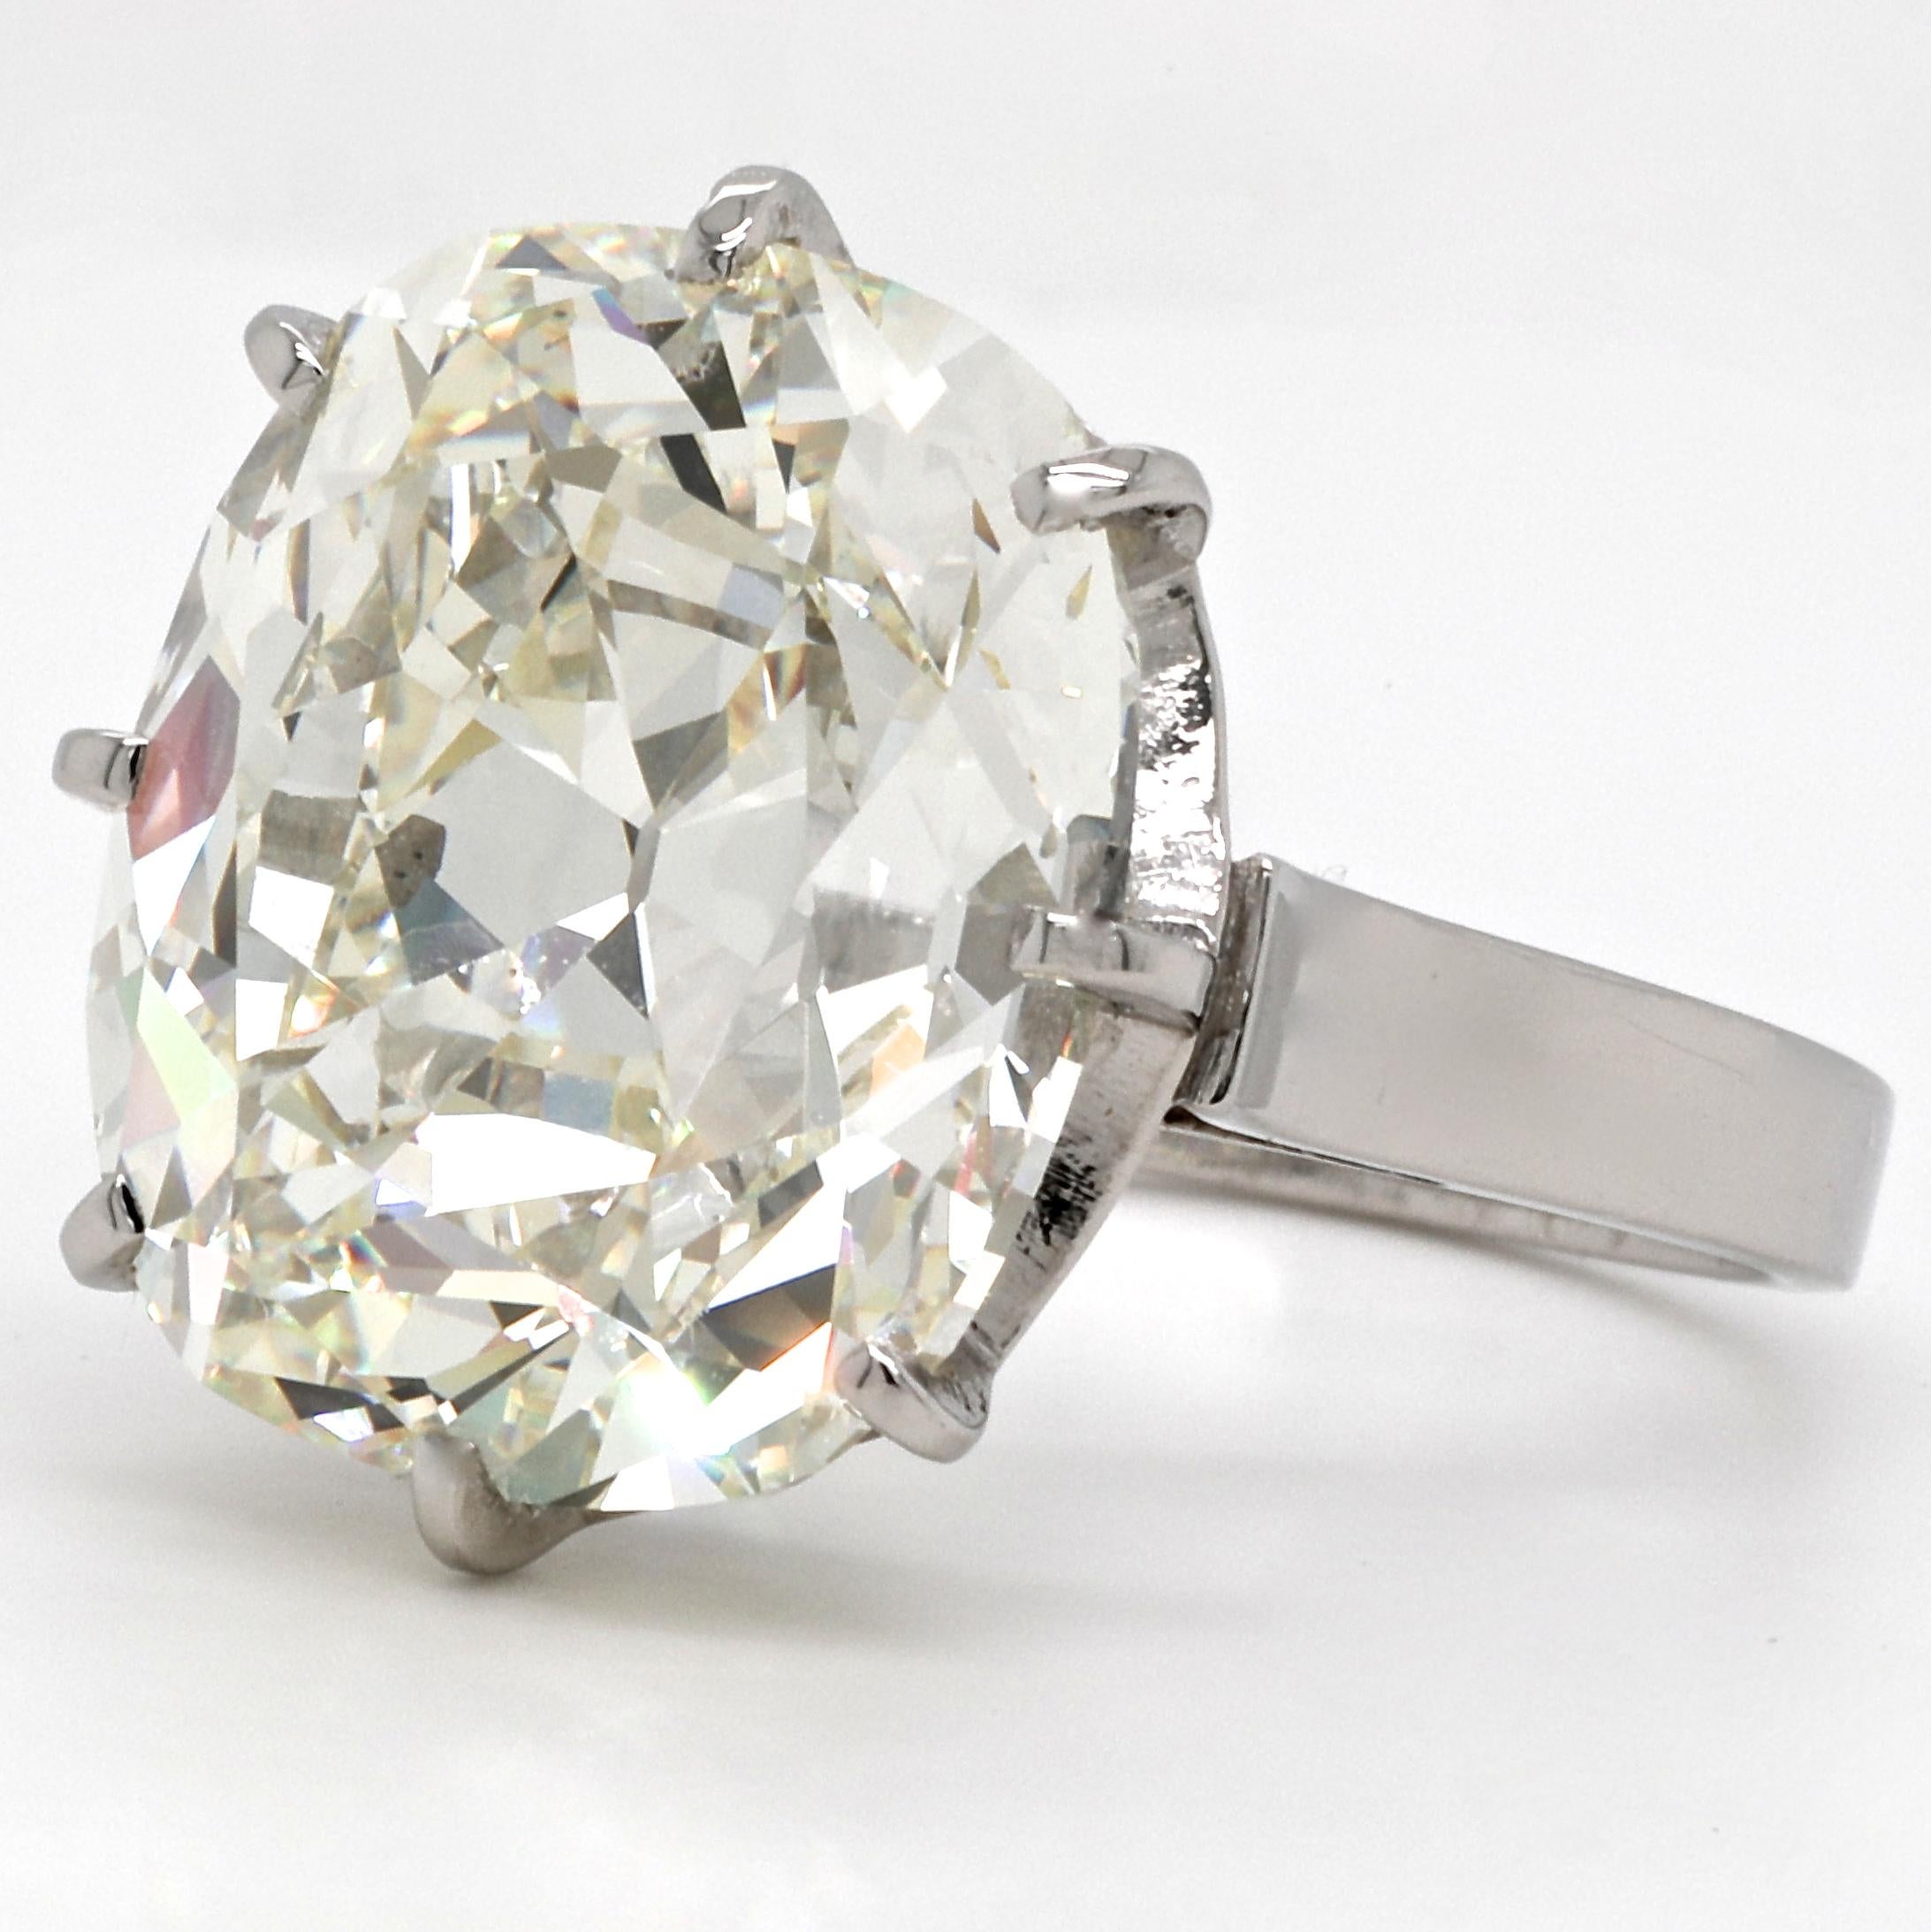 A ring for you to make a statement with. You will love the beautiful shape of the diamond and because of the large size you will be able to look deep inside the stone. This French Late Art Deco 10.06 carat Antique Cushion Diamond Platinum Ring is